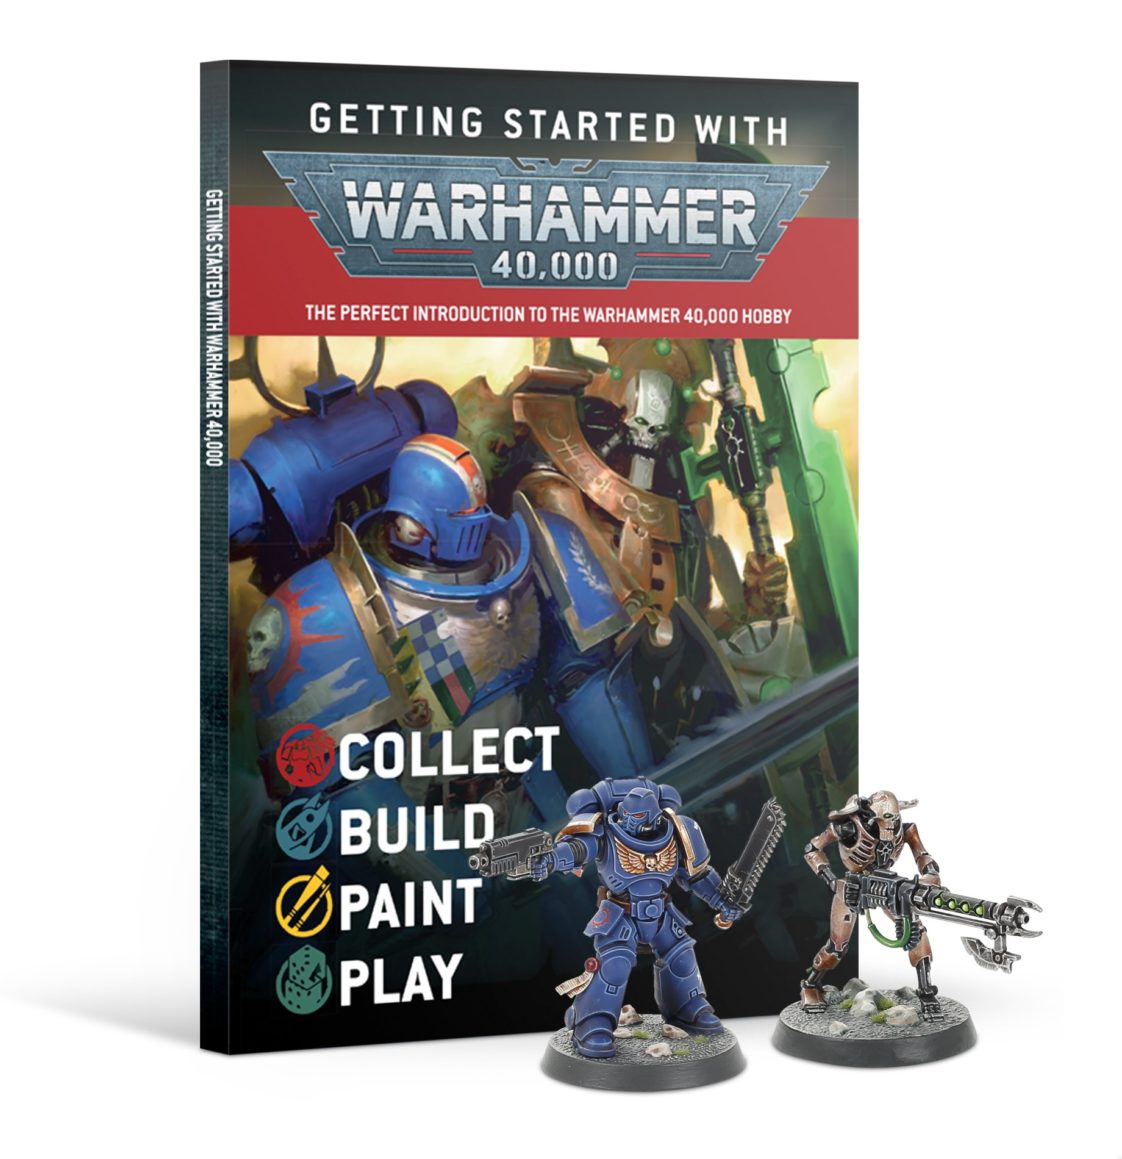 Getting Started With Warhammer 40,000 (English)